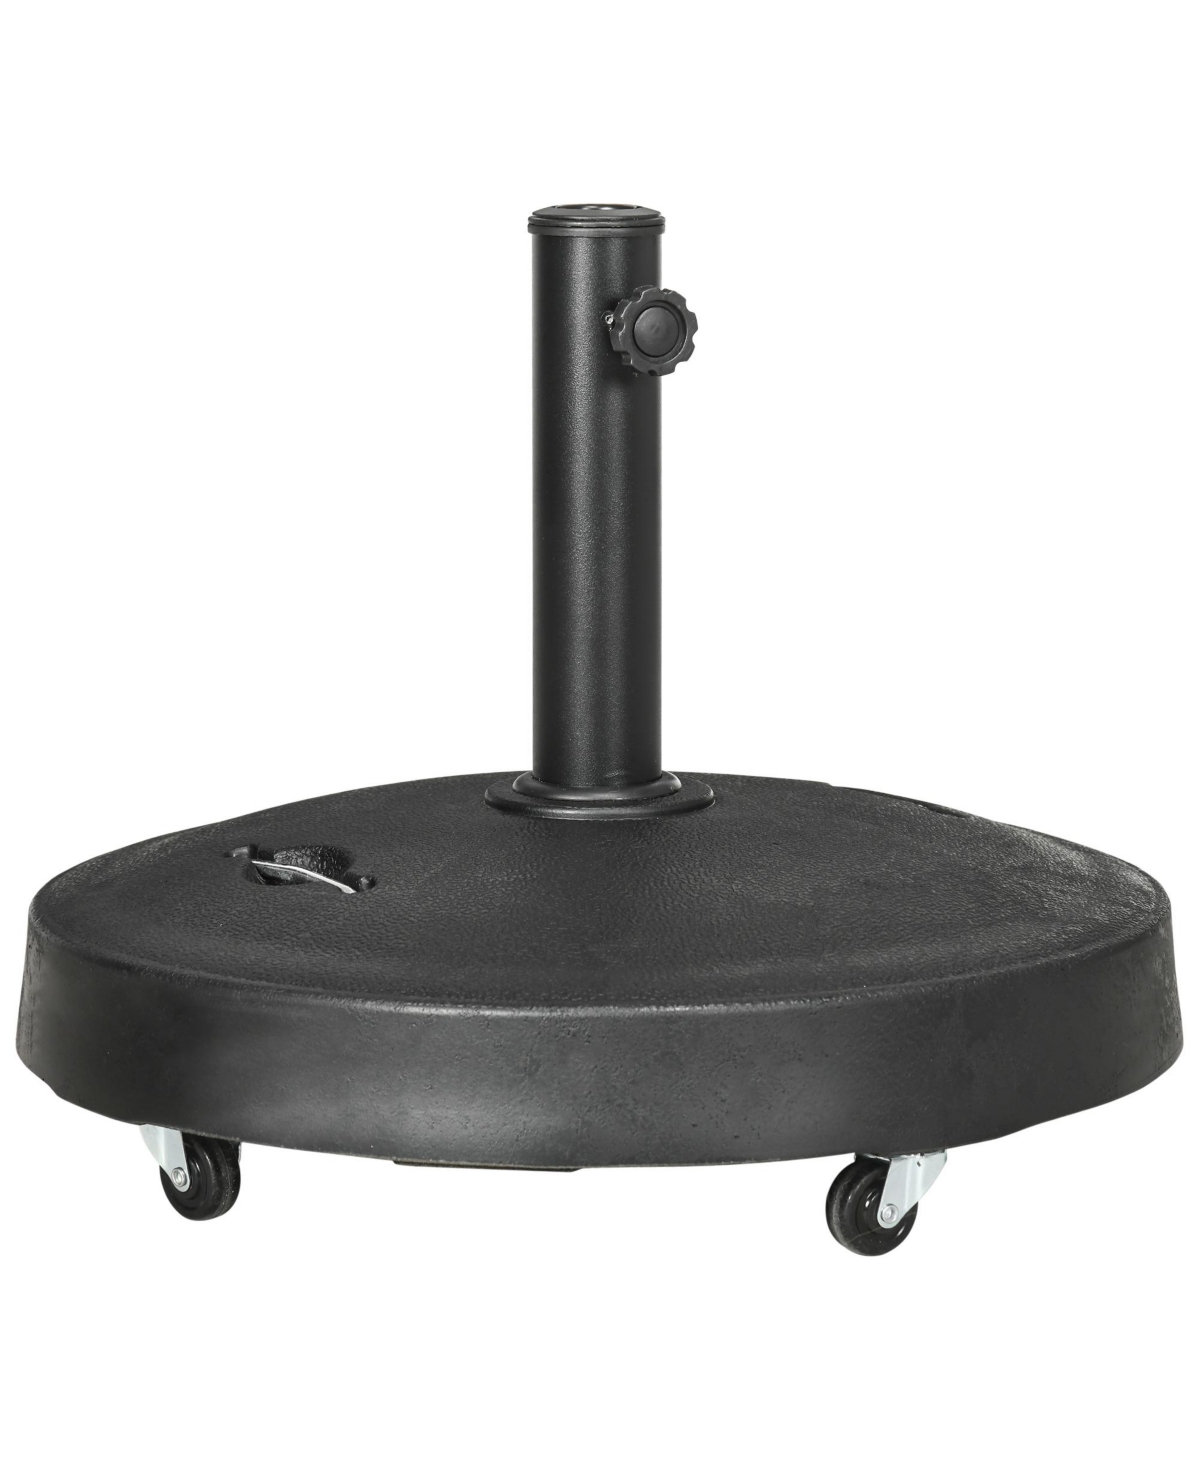 52lbs Resin Patio Umbrella Base with Wheels and Retractable Handles, 20.75" Round Outdoor Umbrella Stand Holder for Parasol Poles 1.5" - 1.9"